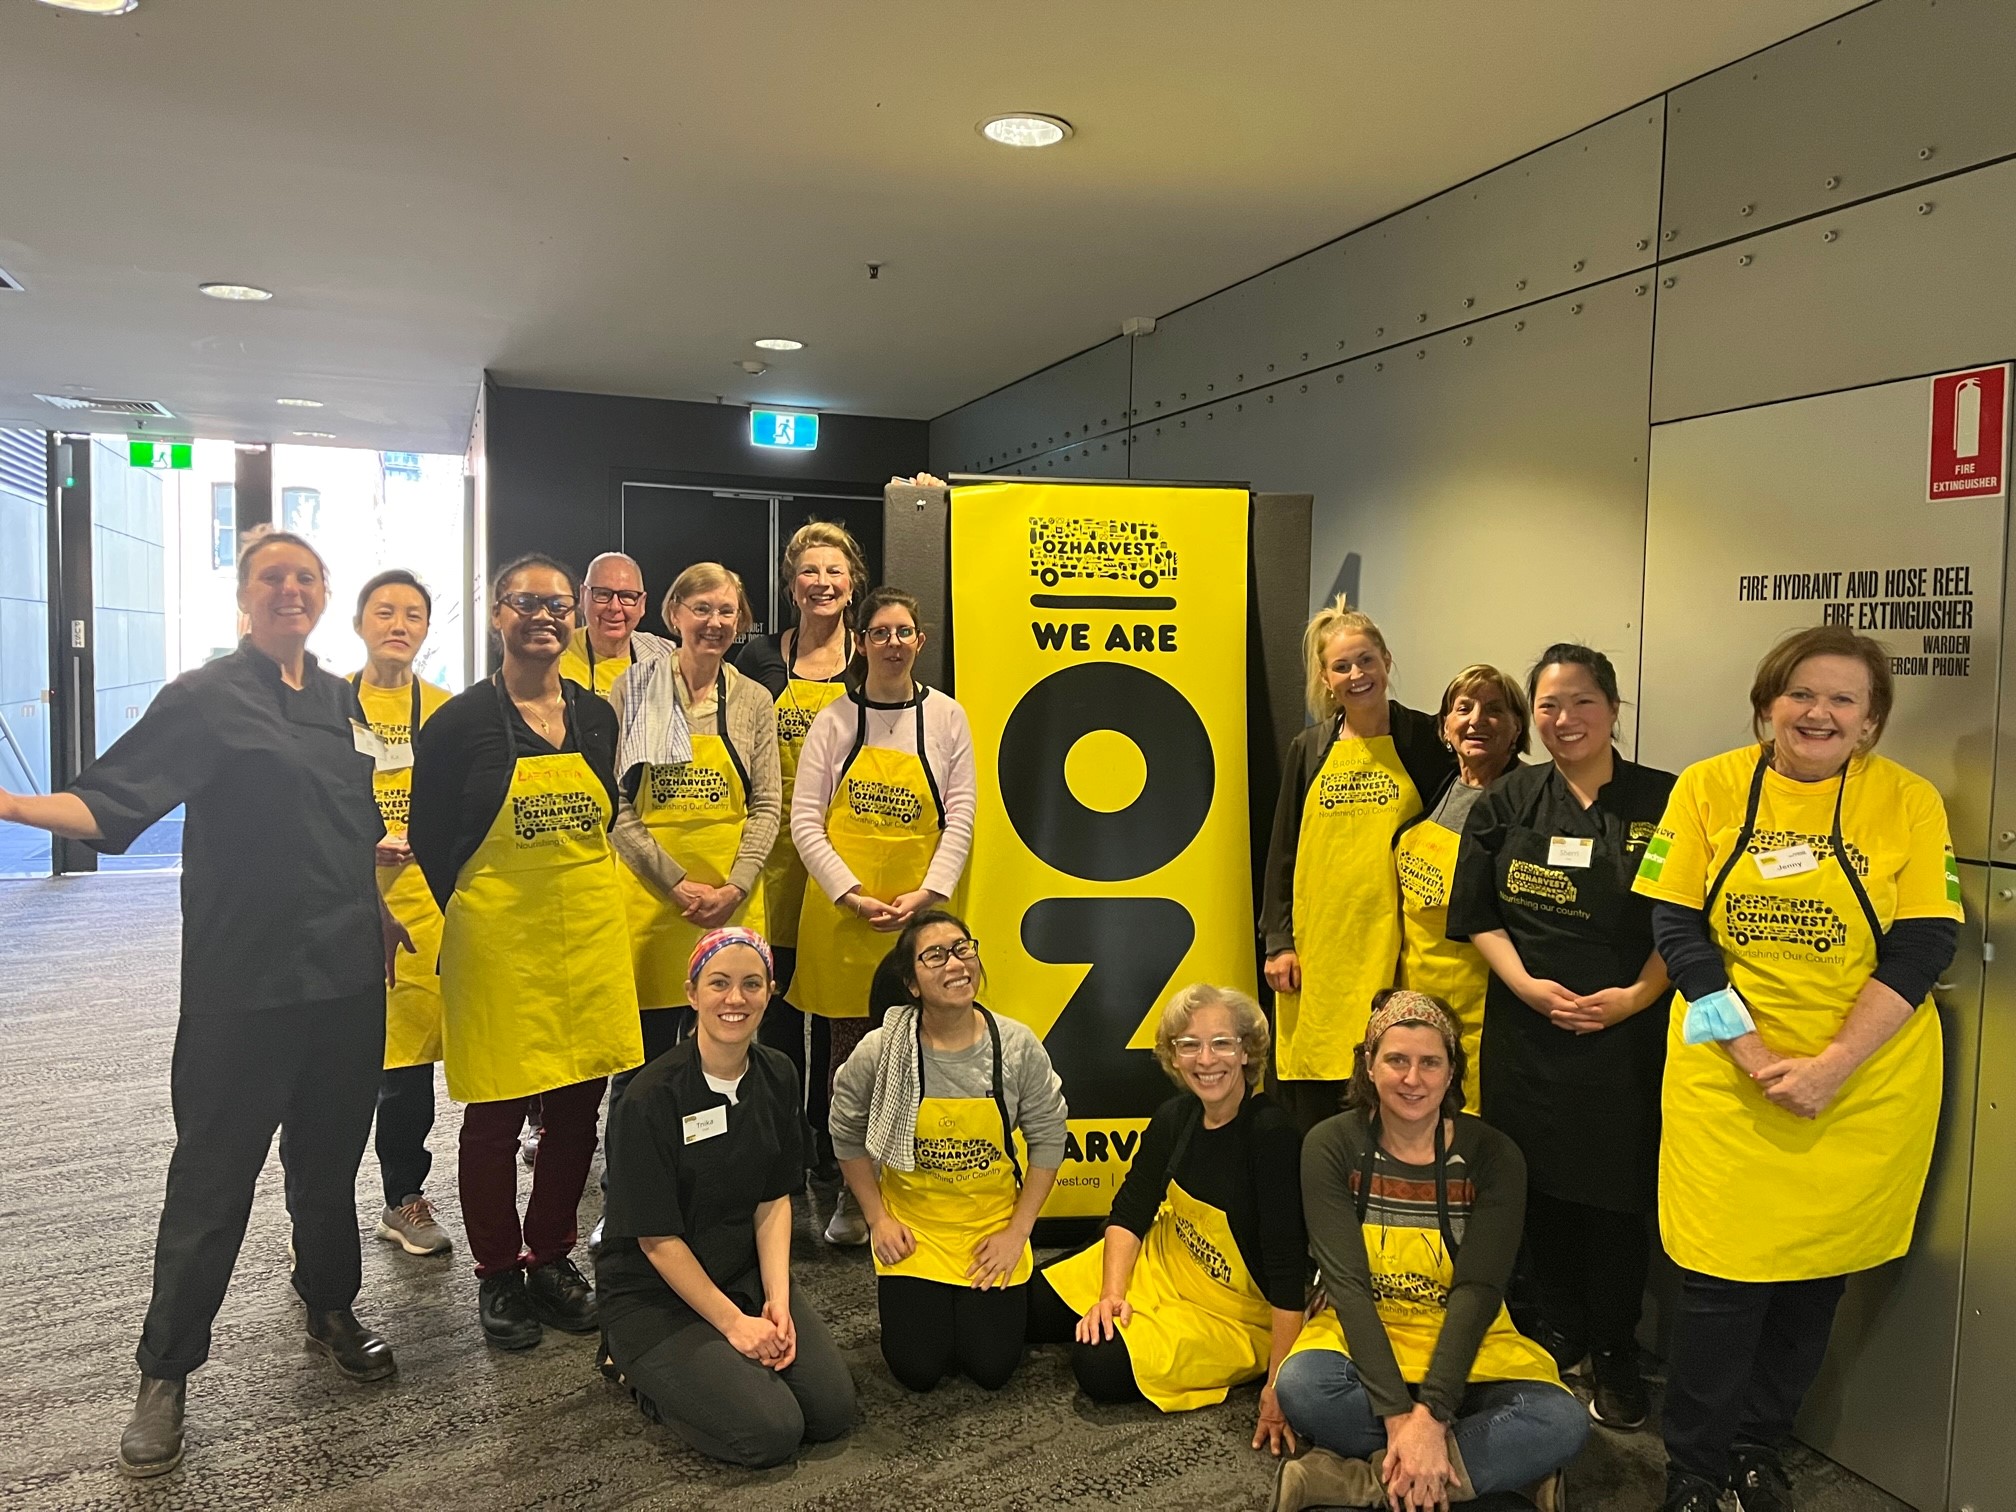 VIC-Team-OzHarvest-Cooking-for-a-Cause-Event-4765e036